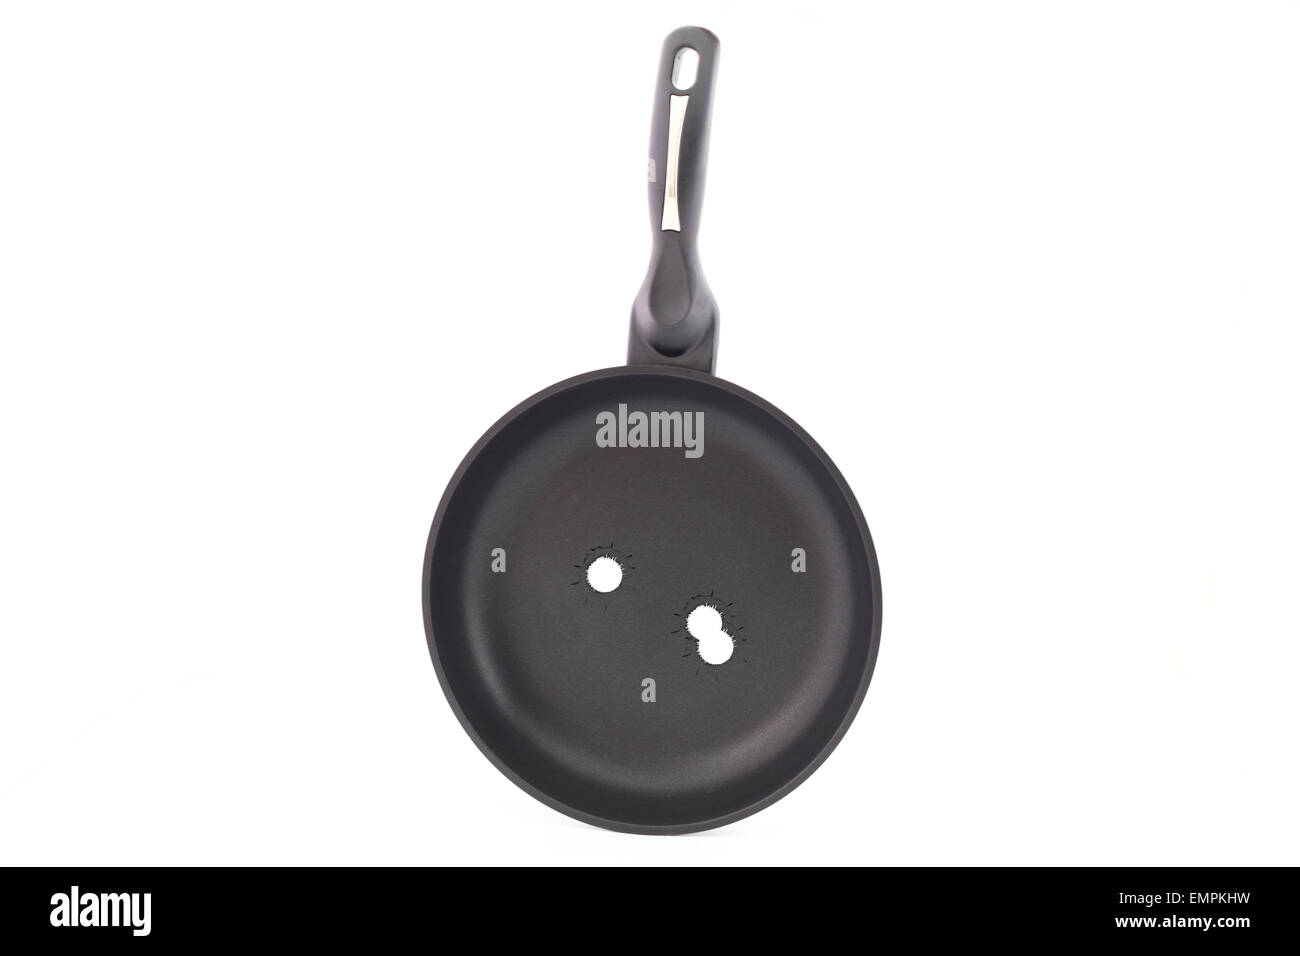 Frying pan on a white background with bullet holes Stock Photo